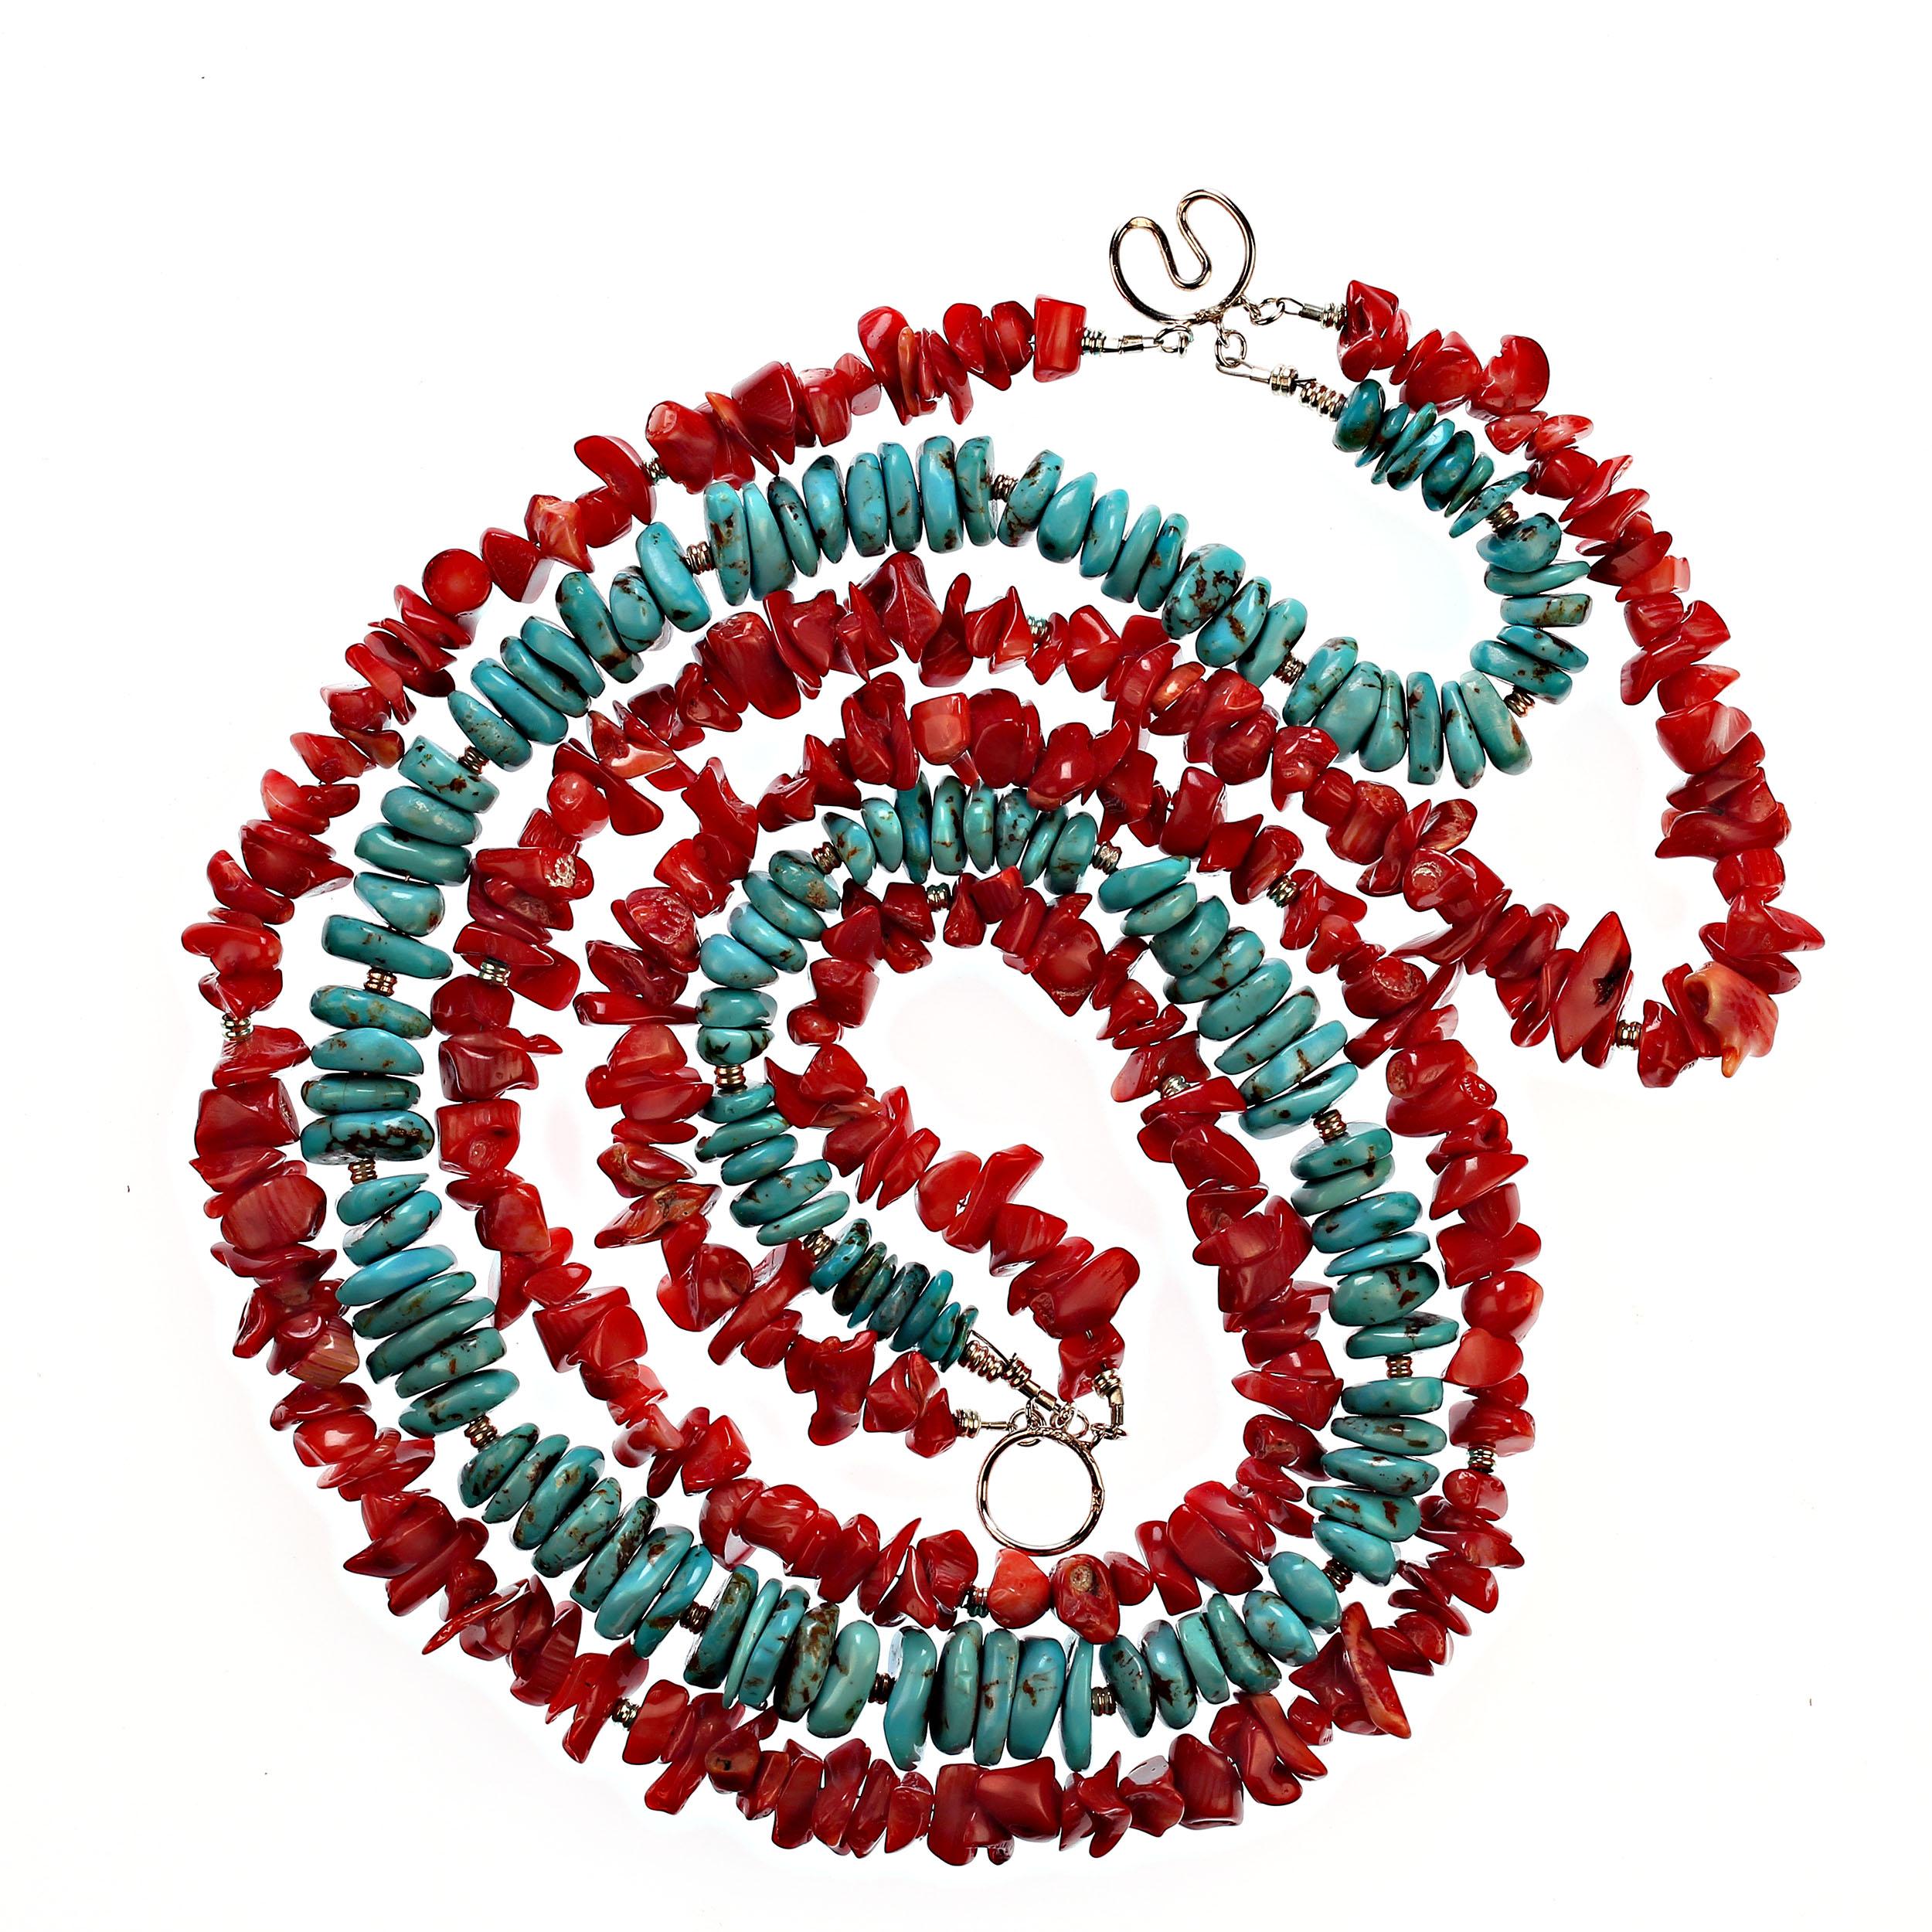 Sophisticated and fun 21 inch necklace of red coral chips and Hubei Turquoise slices. This unique necklace features two strands of highly polished chips of red coral and one strand of highly polished rondelles of Hubei Turquoise. All three strands